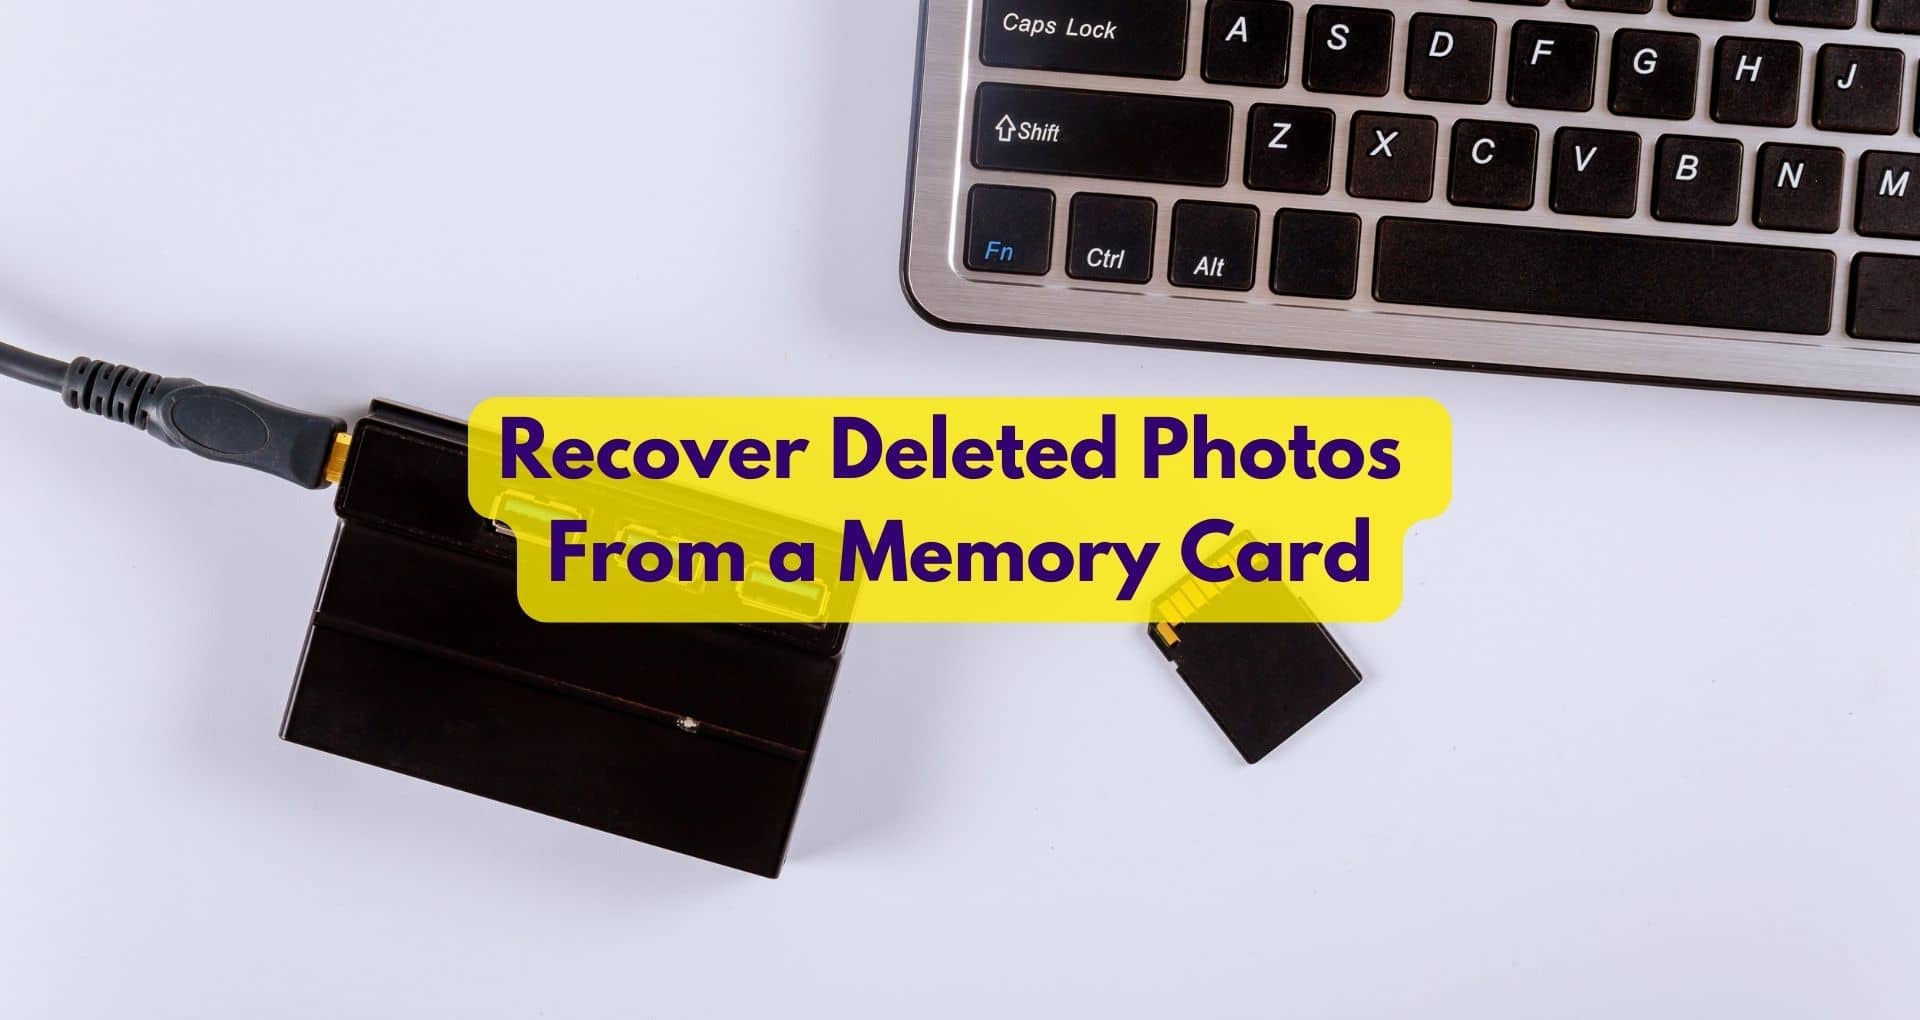 How To Recover Deleted Photos From a Memory Card?